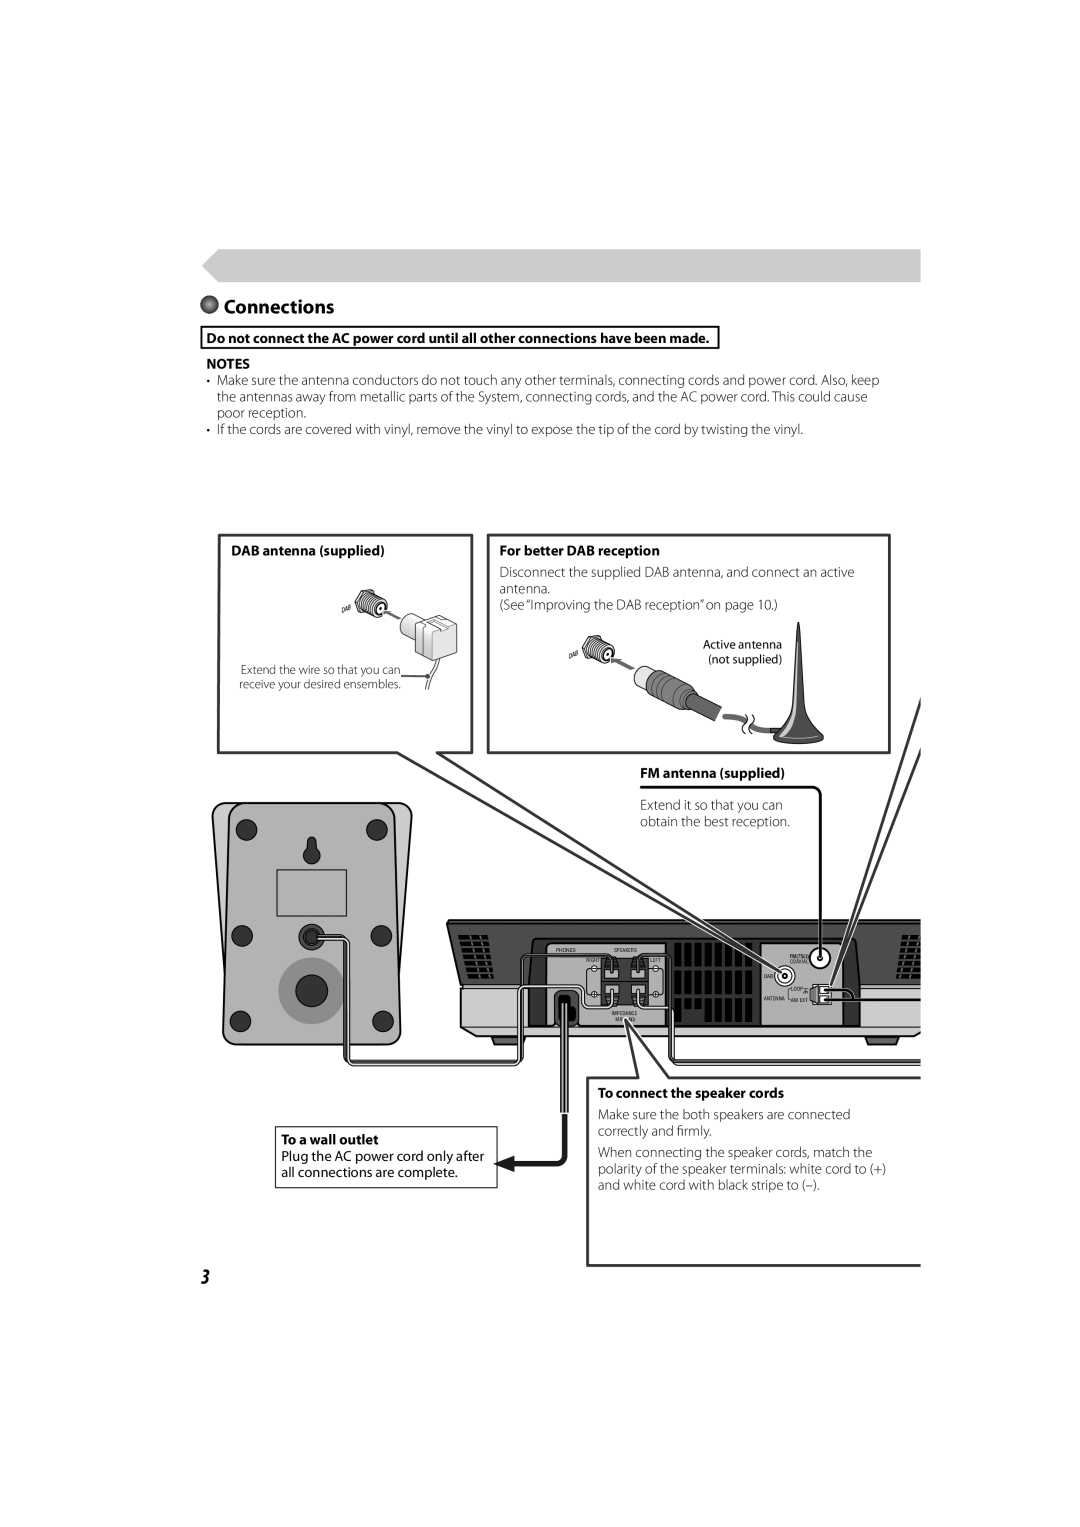 JVC GNT0065-025A manual Connections, For better DAB reception, FM antenna supplied, To a wall outlet 